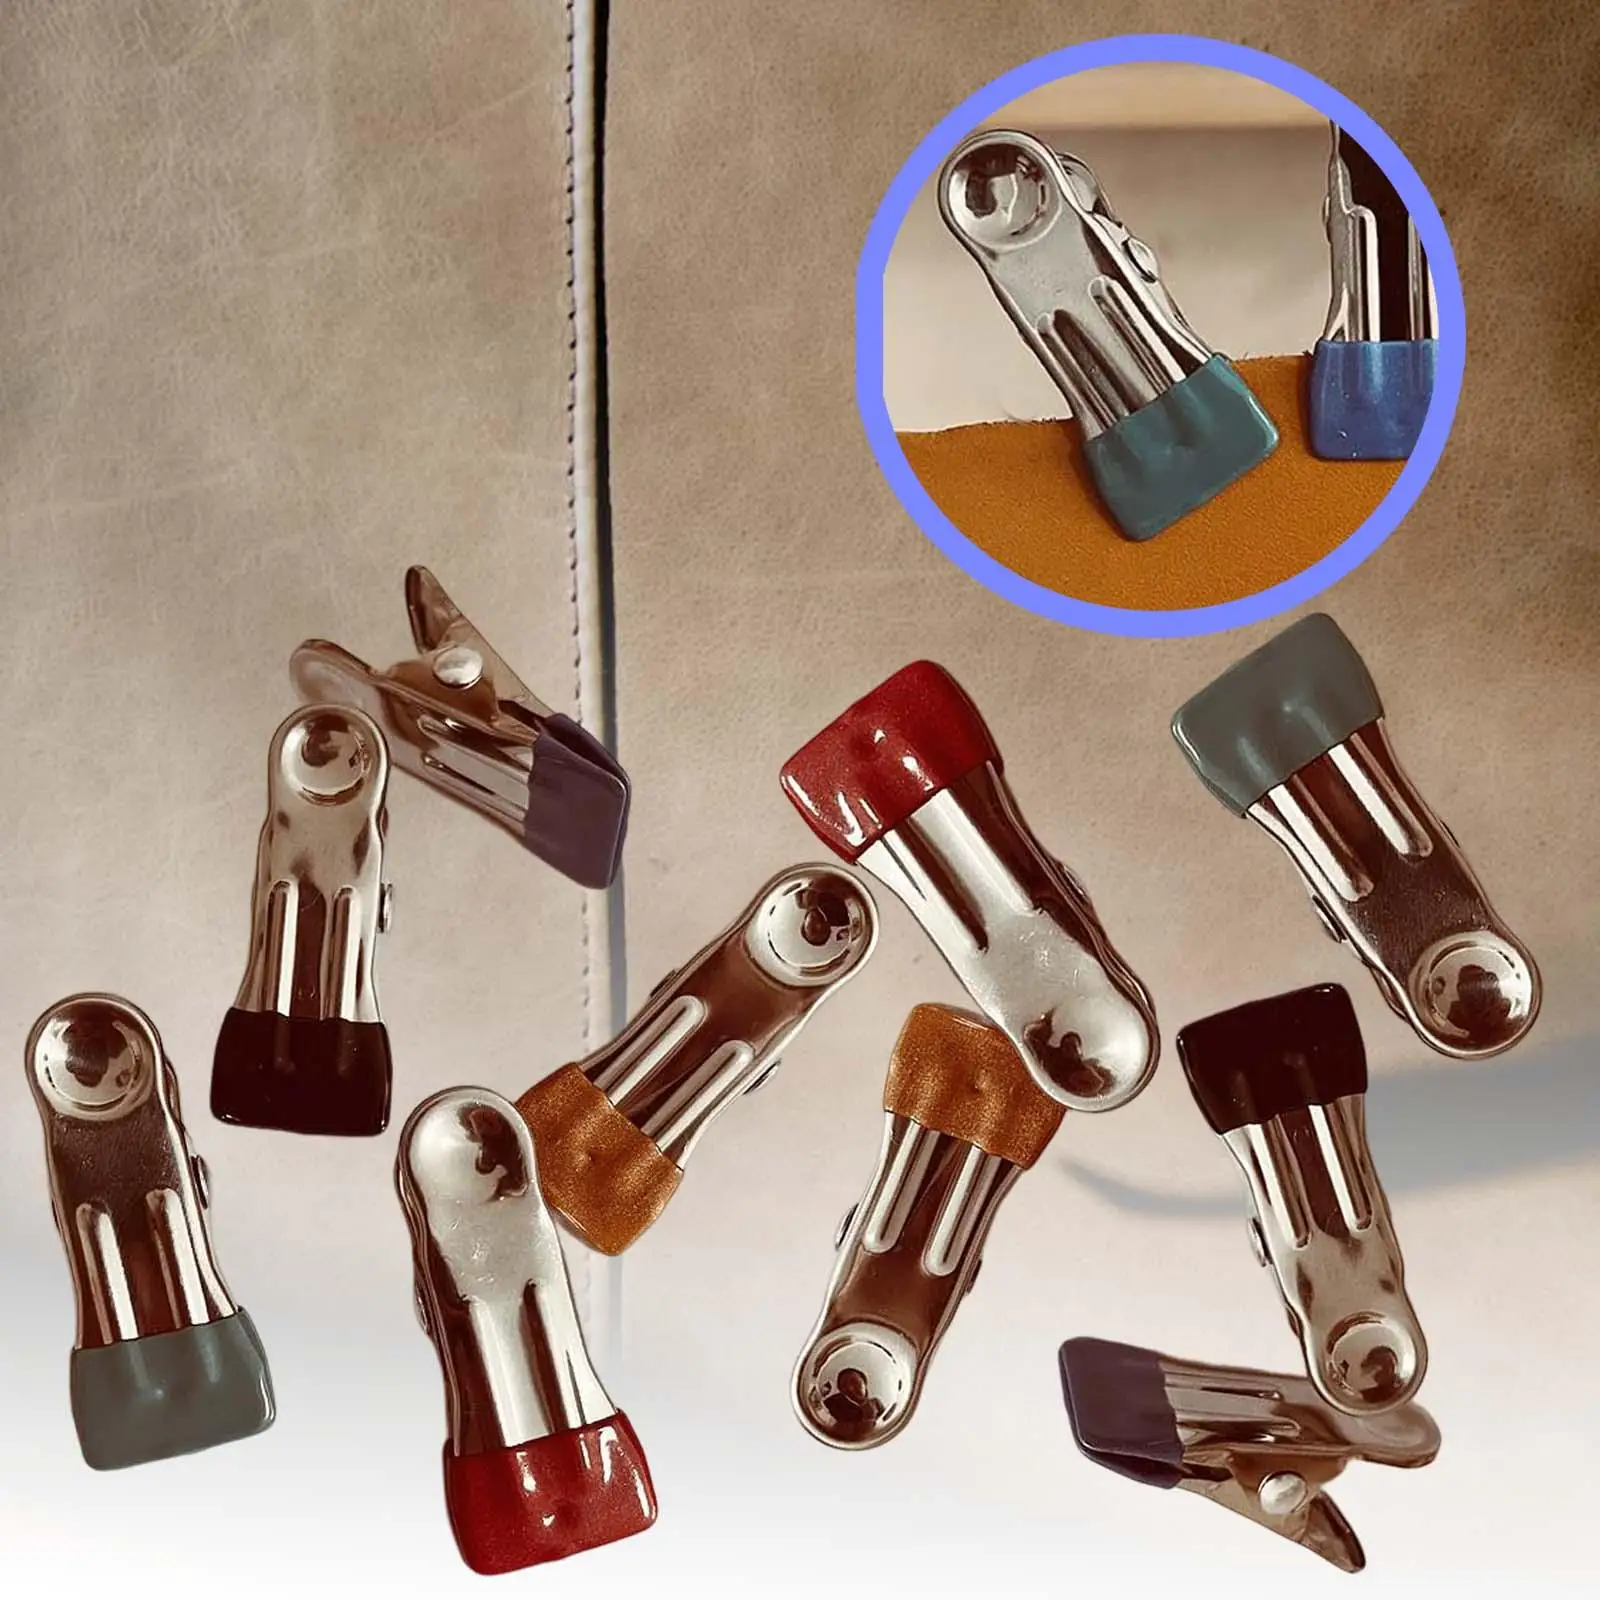 10 Pieces Stainless Steel Sewing Clips No Trace Clip Holder Clamps Durable